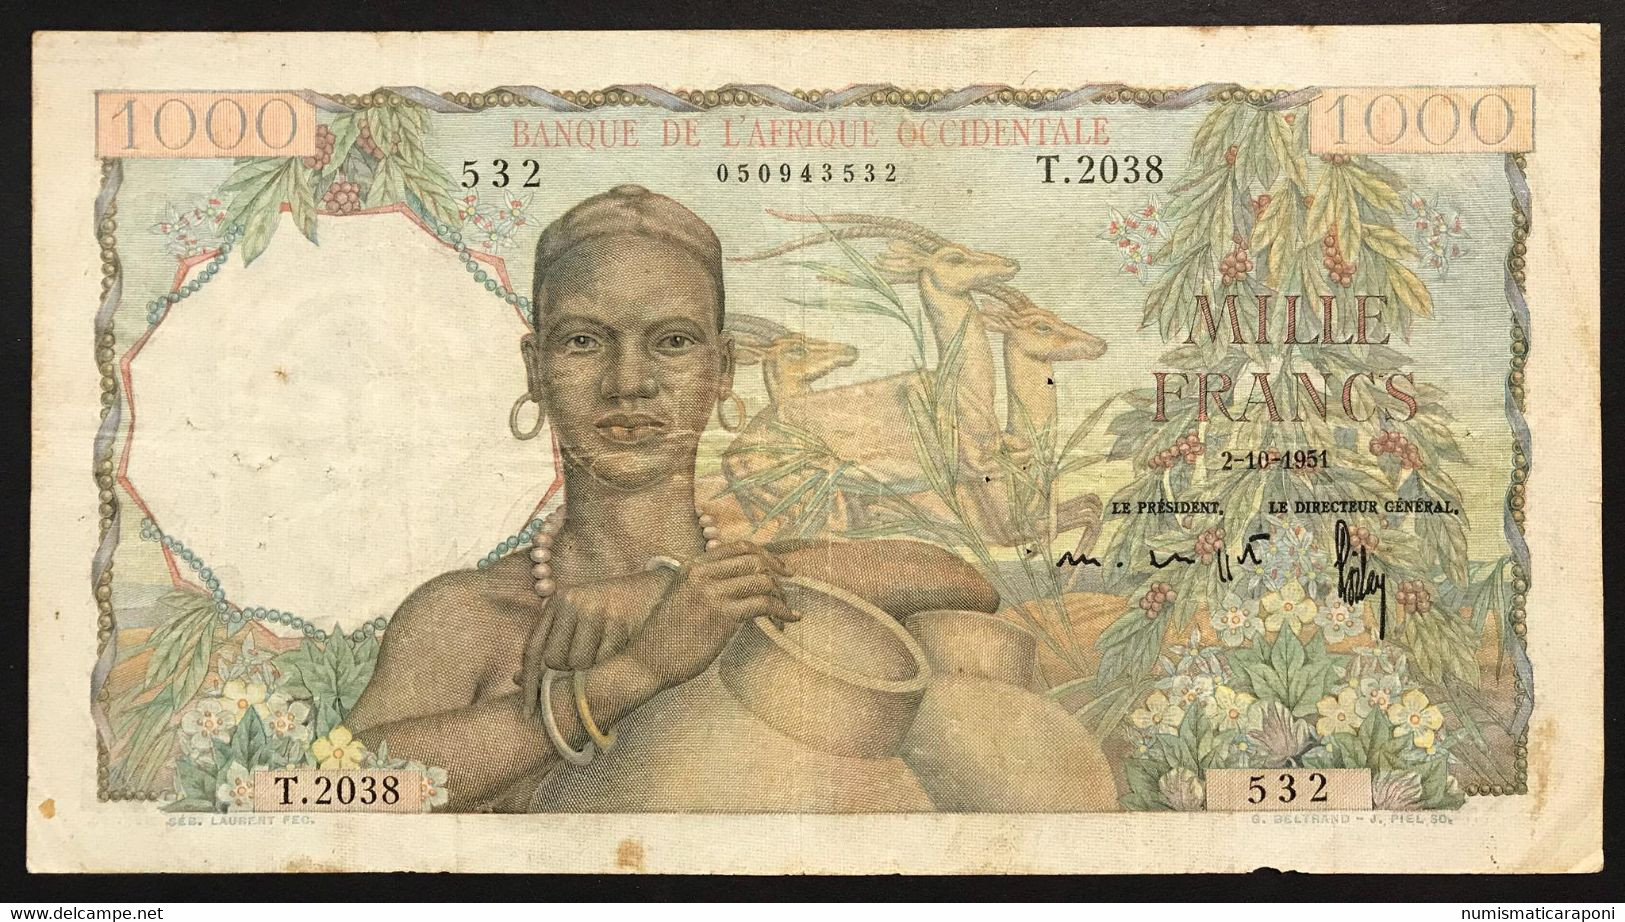 Afrique Occidentale AOF French West Africa 1000 Francs 02 10 1951 Pick#42 Forellini E Pieghe  Lotto 3717 - Estados De Africa Occidental